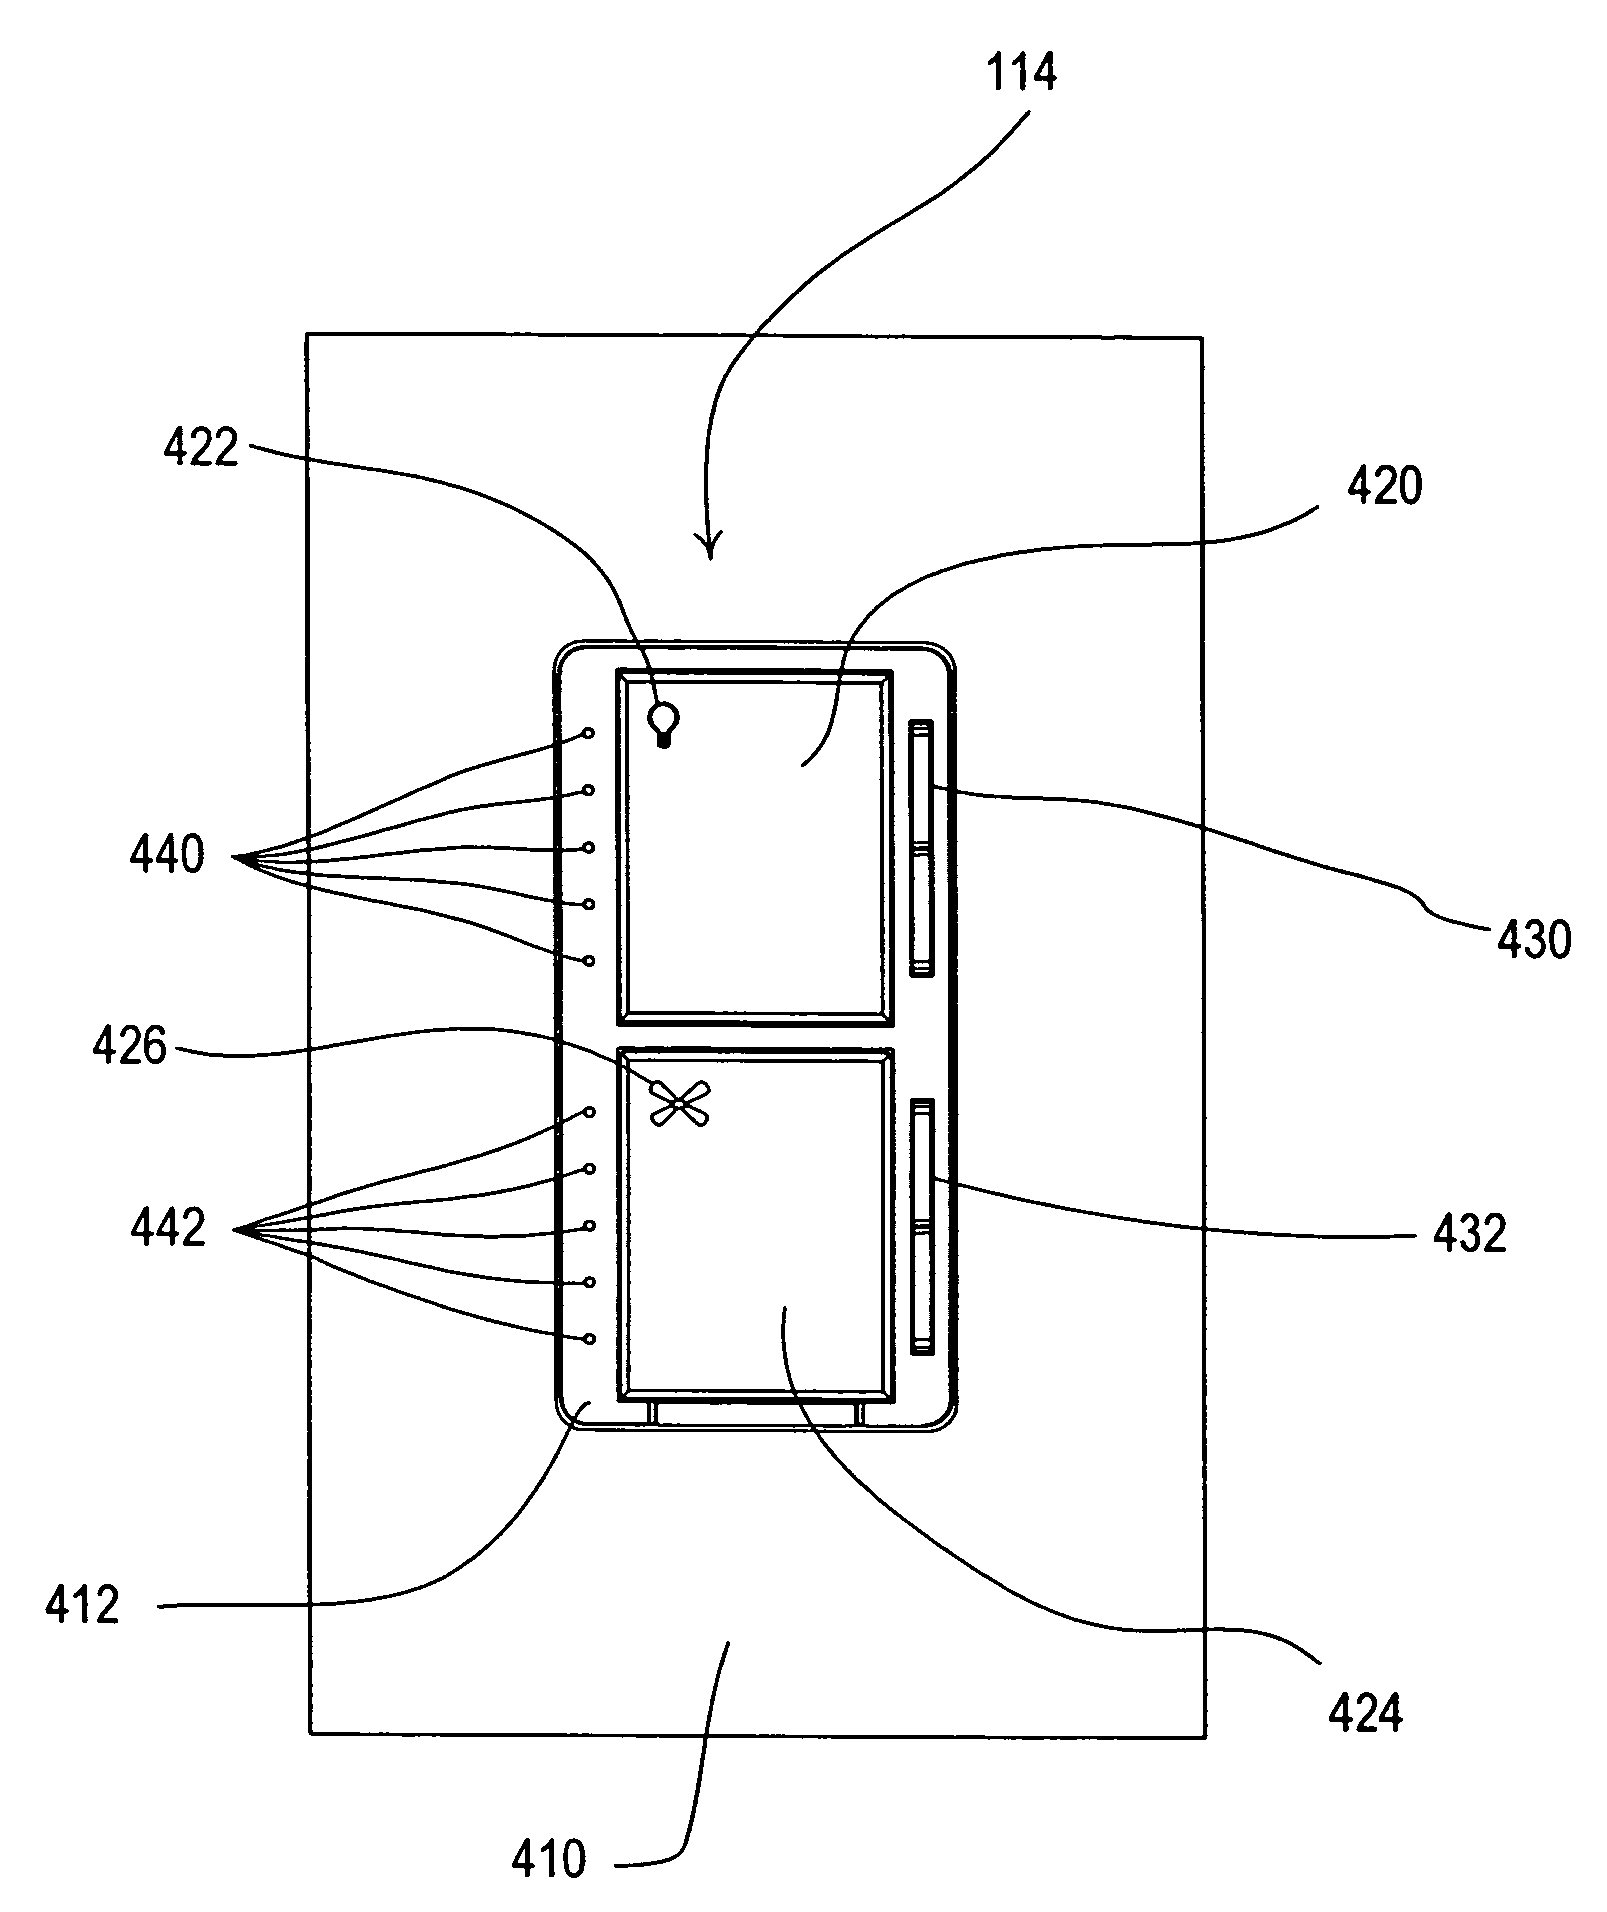 Apparatus and method for displaying operating characteristics on status indicators